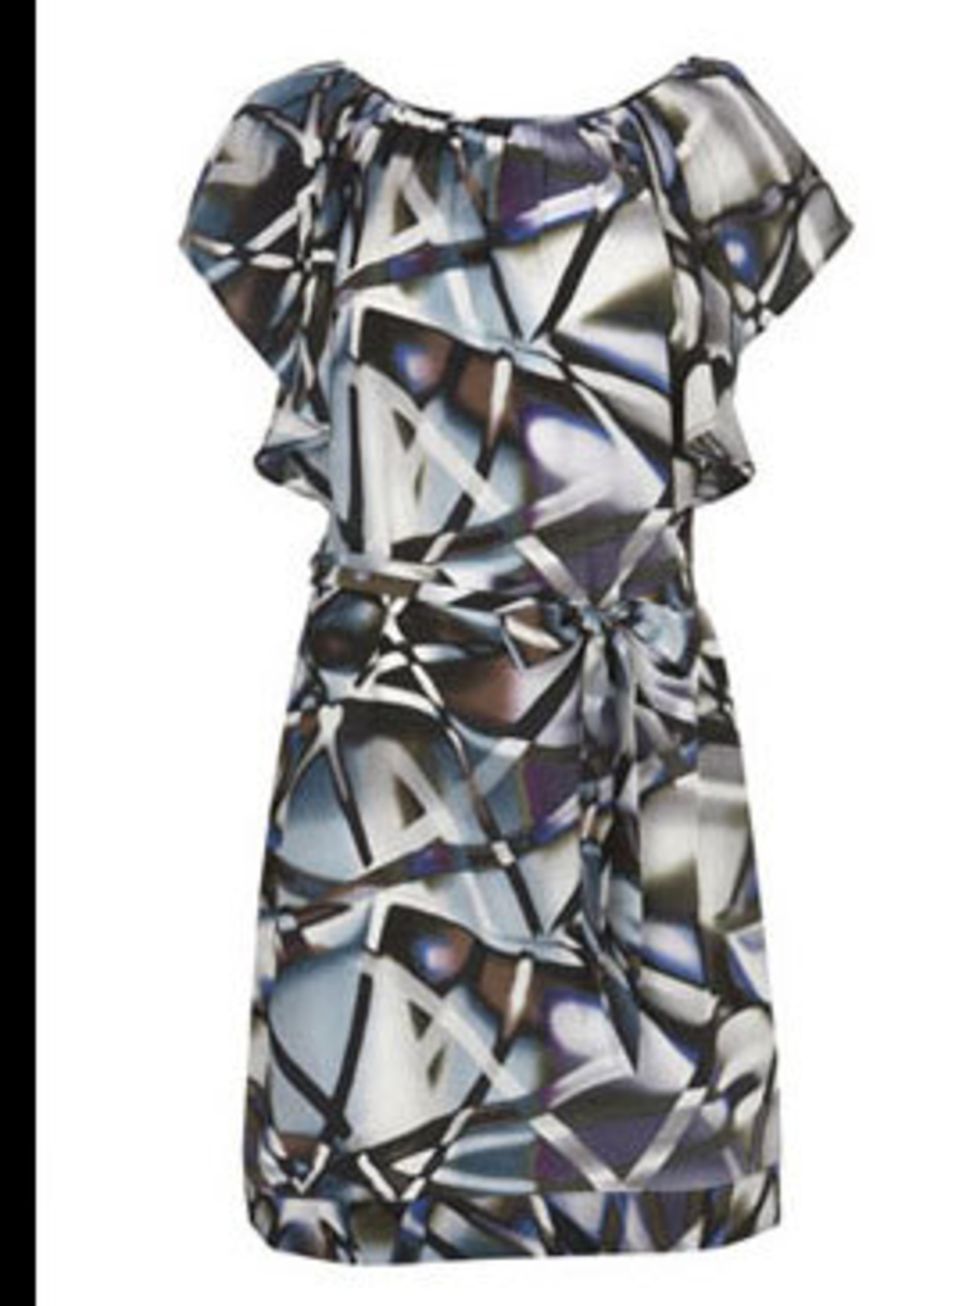 <p>Dress, £60 by <a href="http://www.warehouse.co.uk/fcp/product/fashion//CRYSTAL-SHADOW-DRESS/12639">Warehouse</a></p>